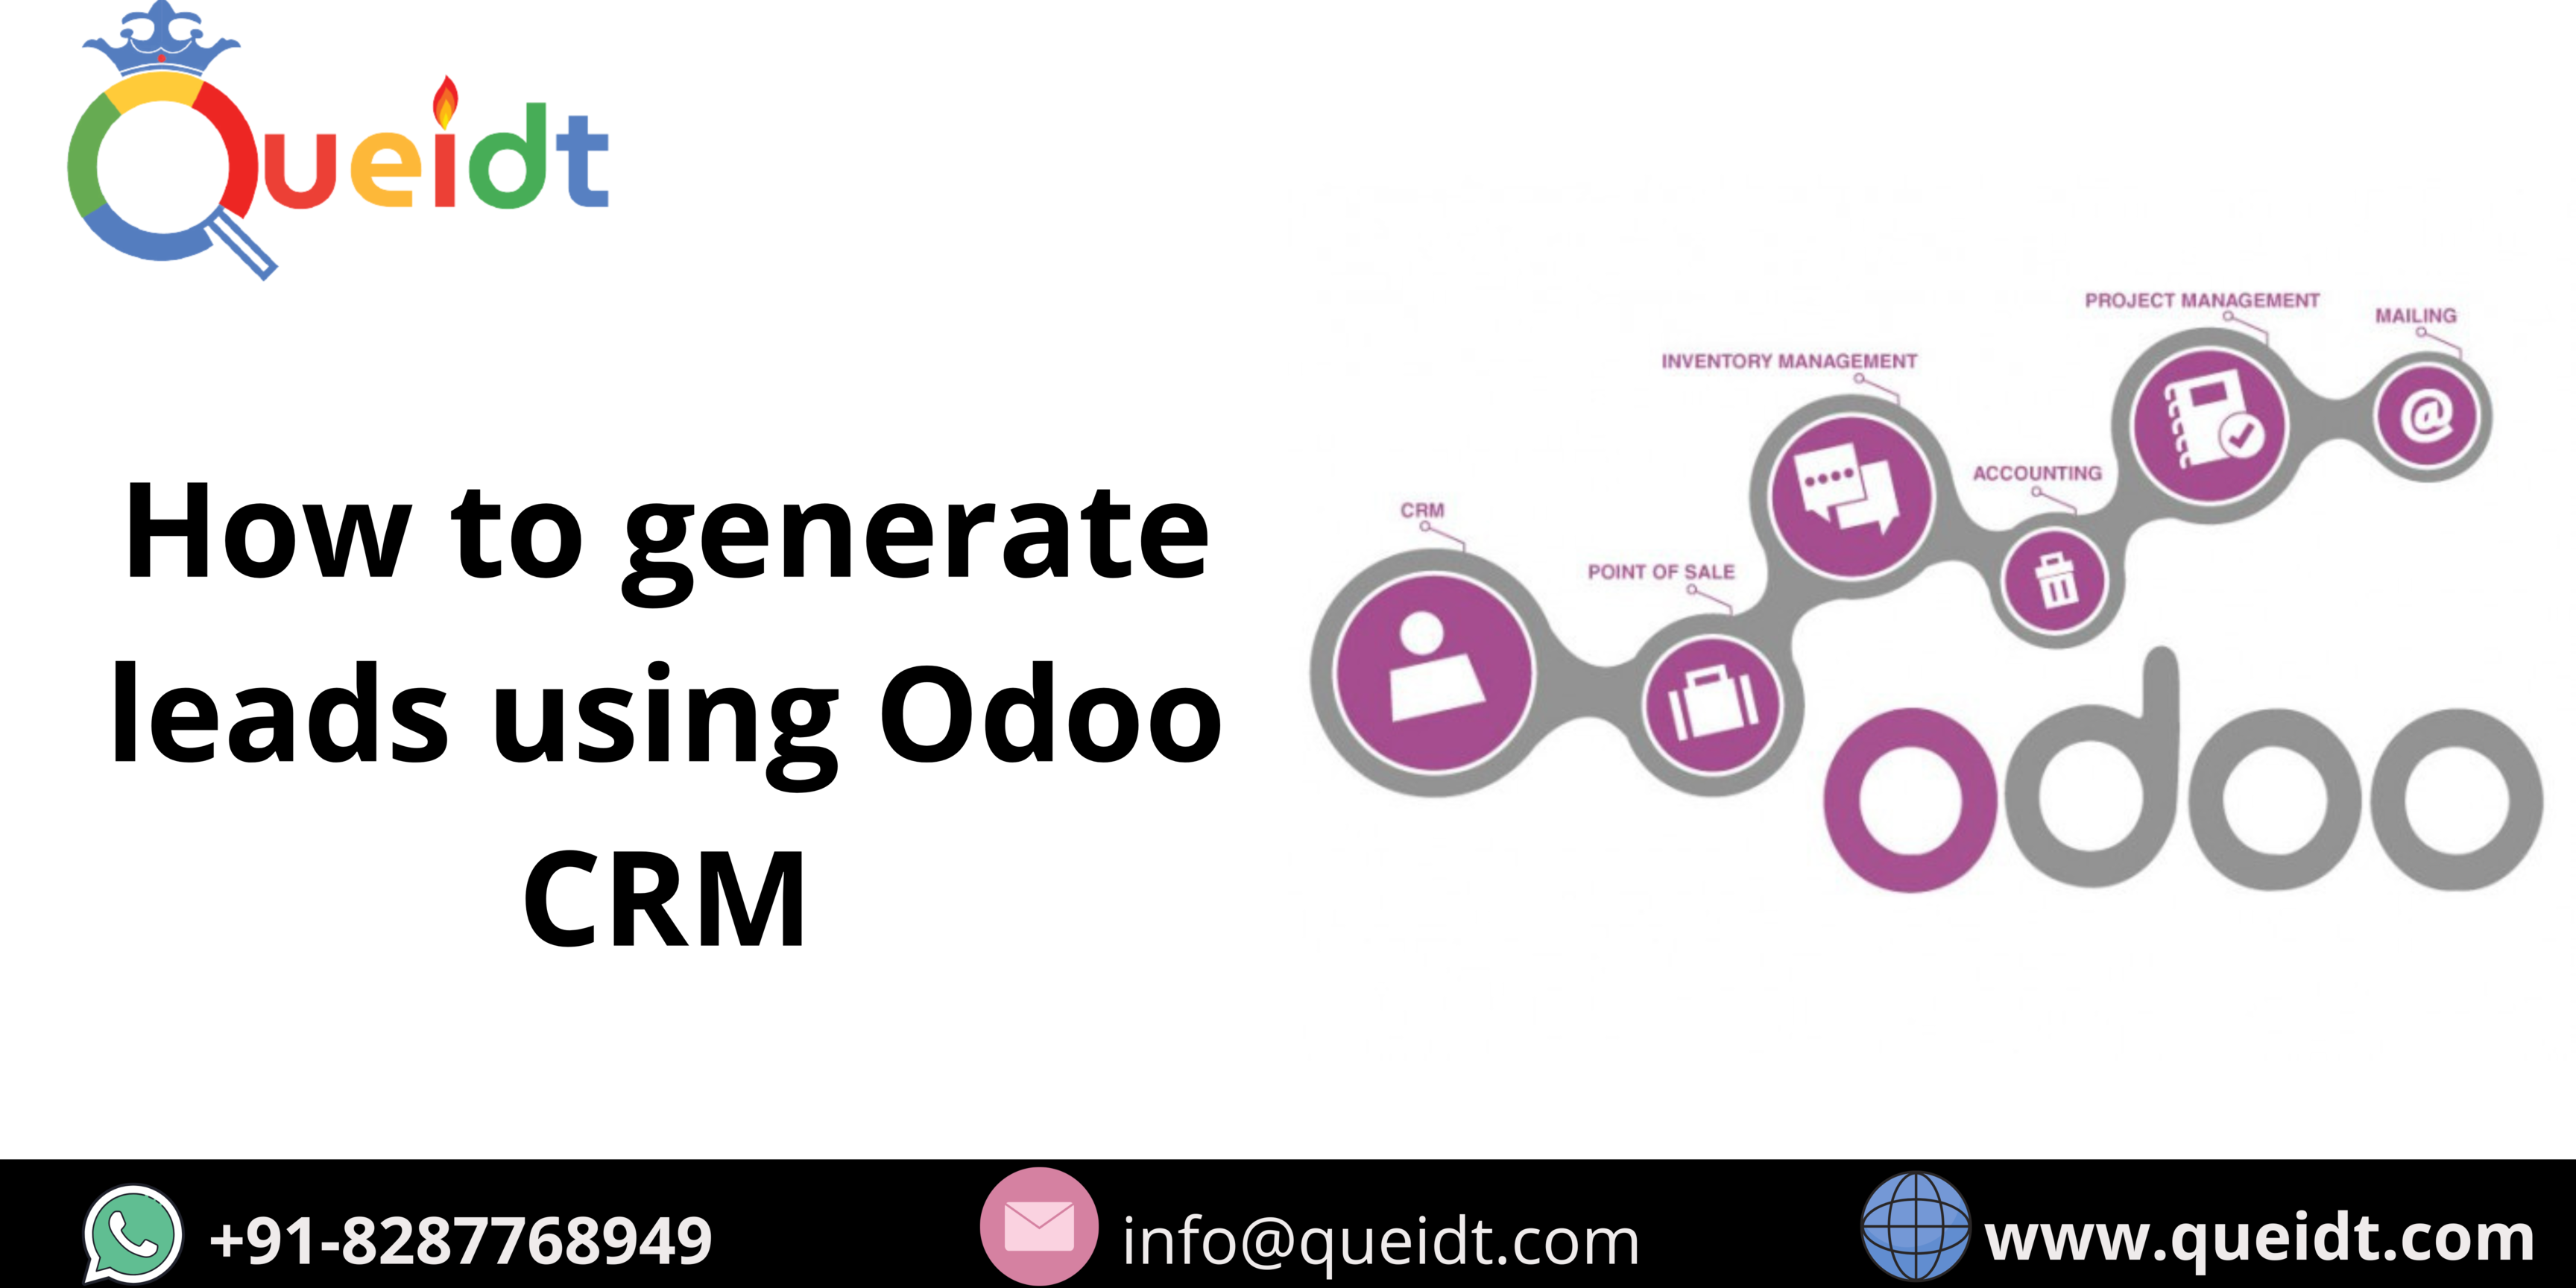 How to generate leads using odoo CRM